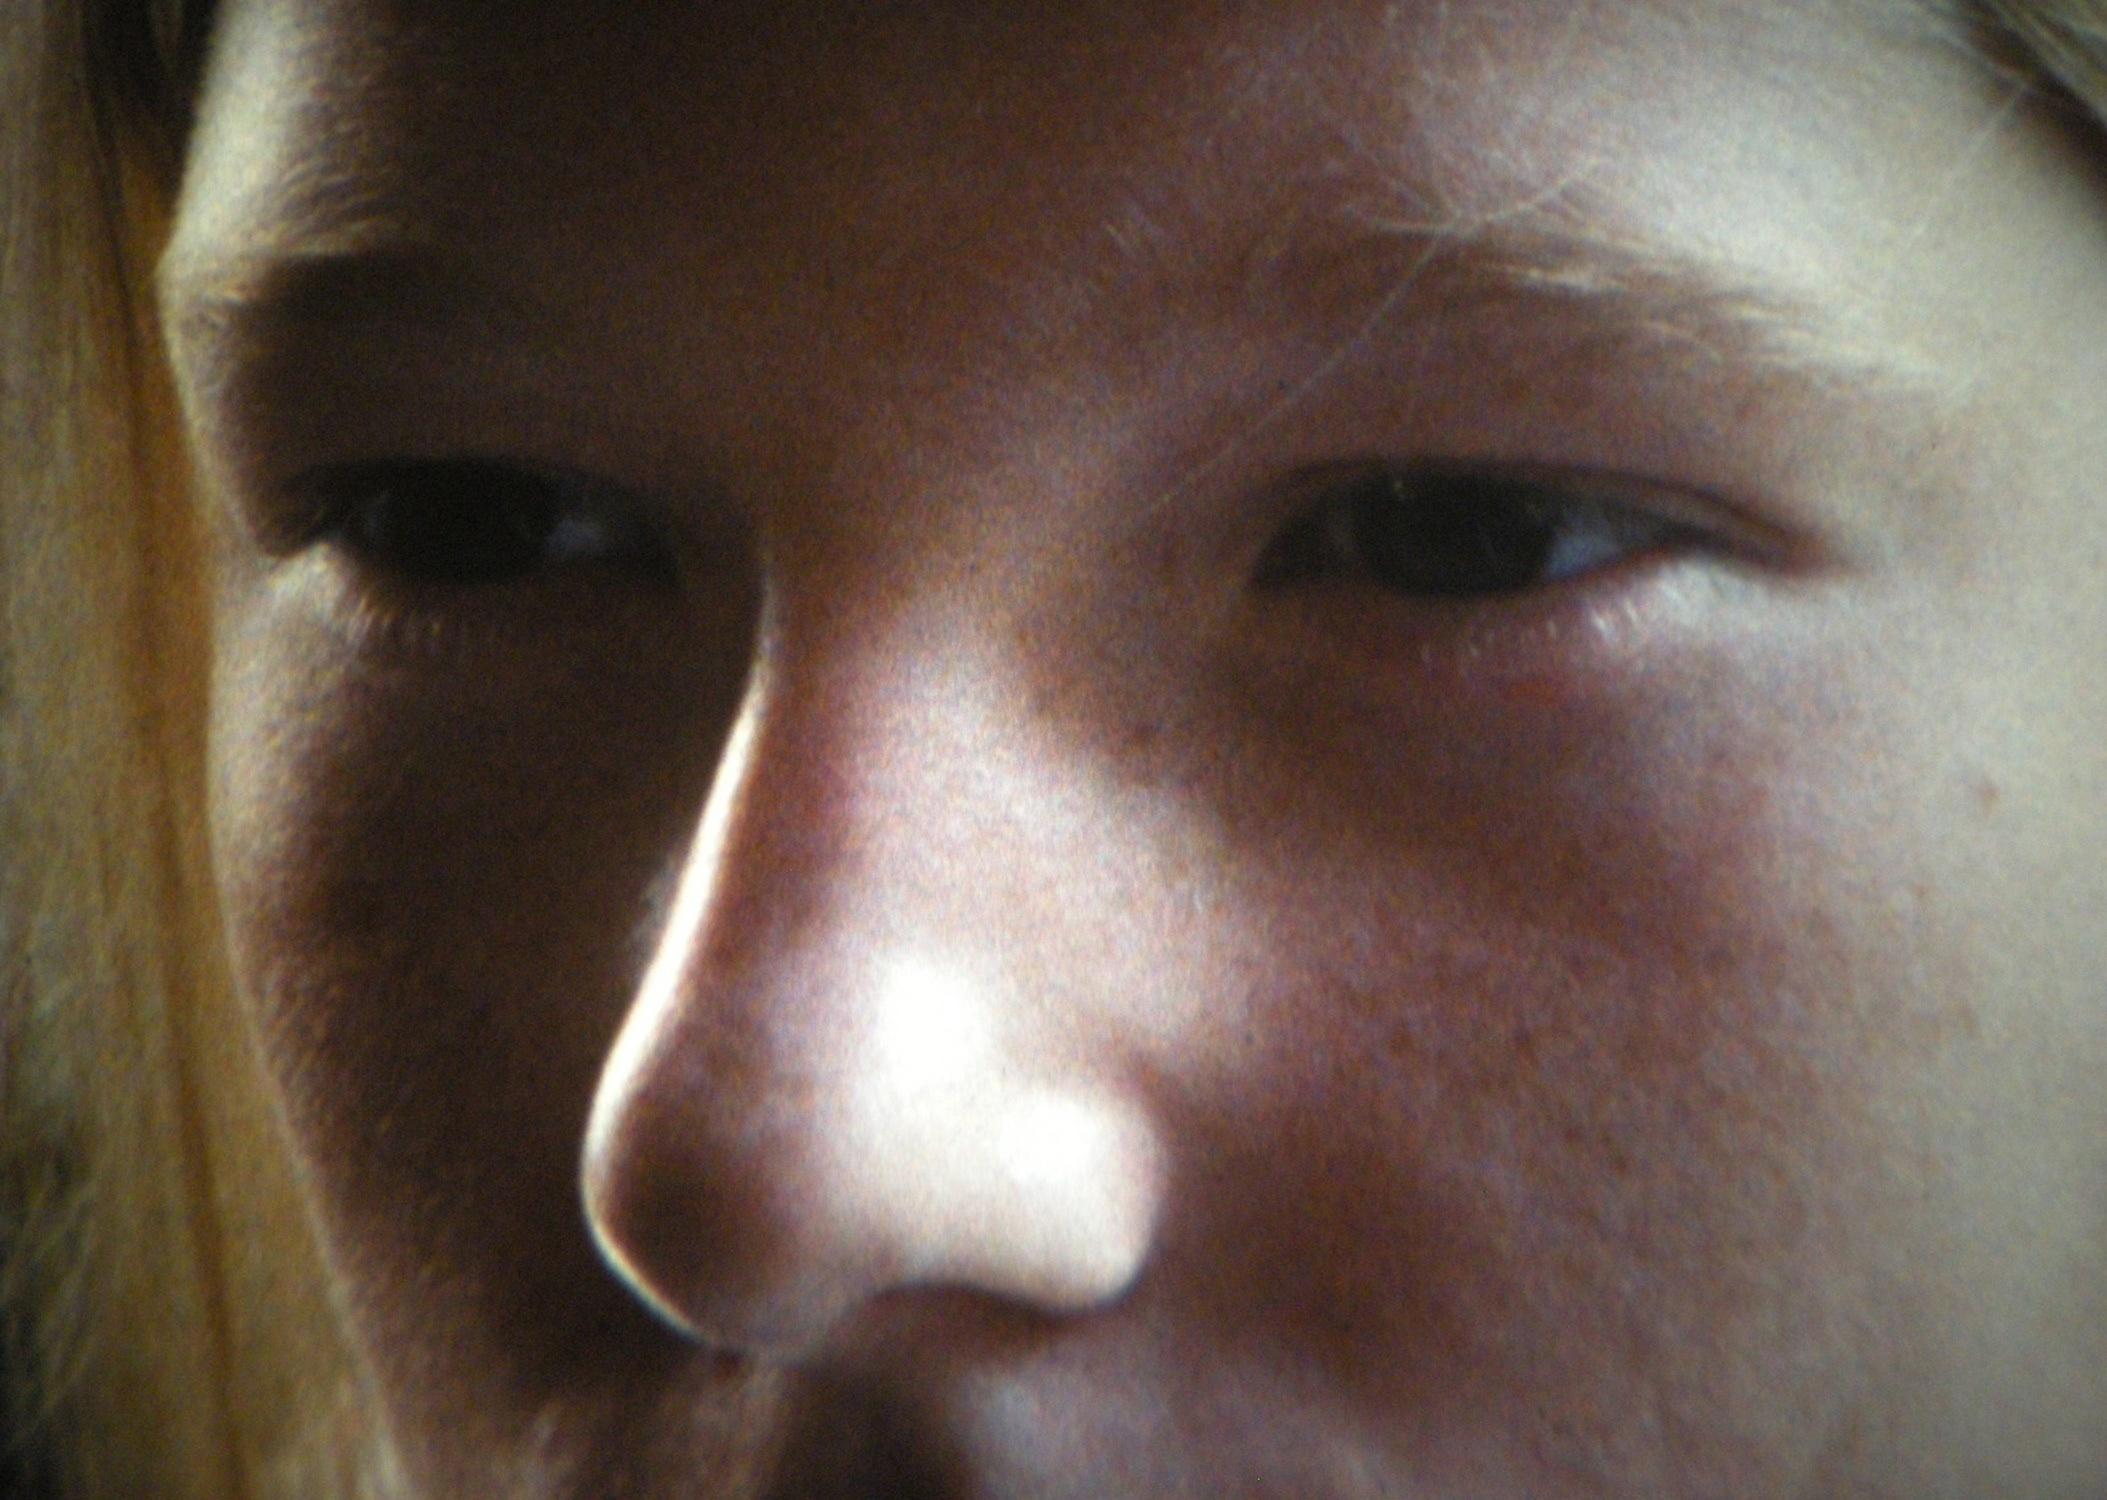 A close-up photograph shows the eyes and nose of a young light-skinned person looking off to the right.